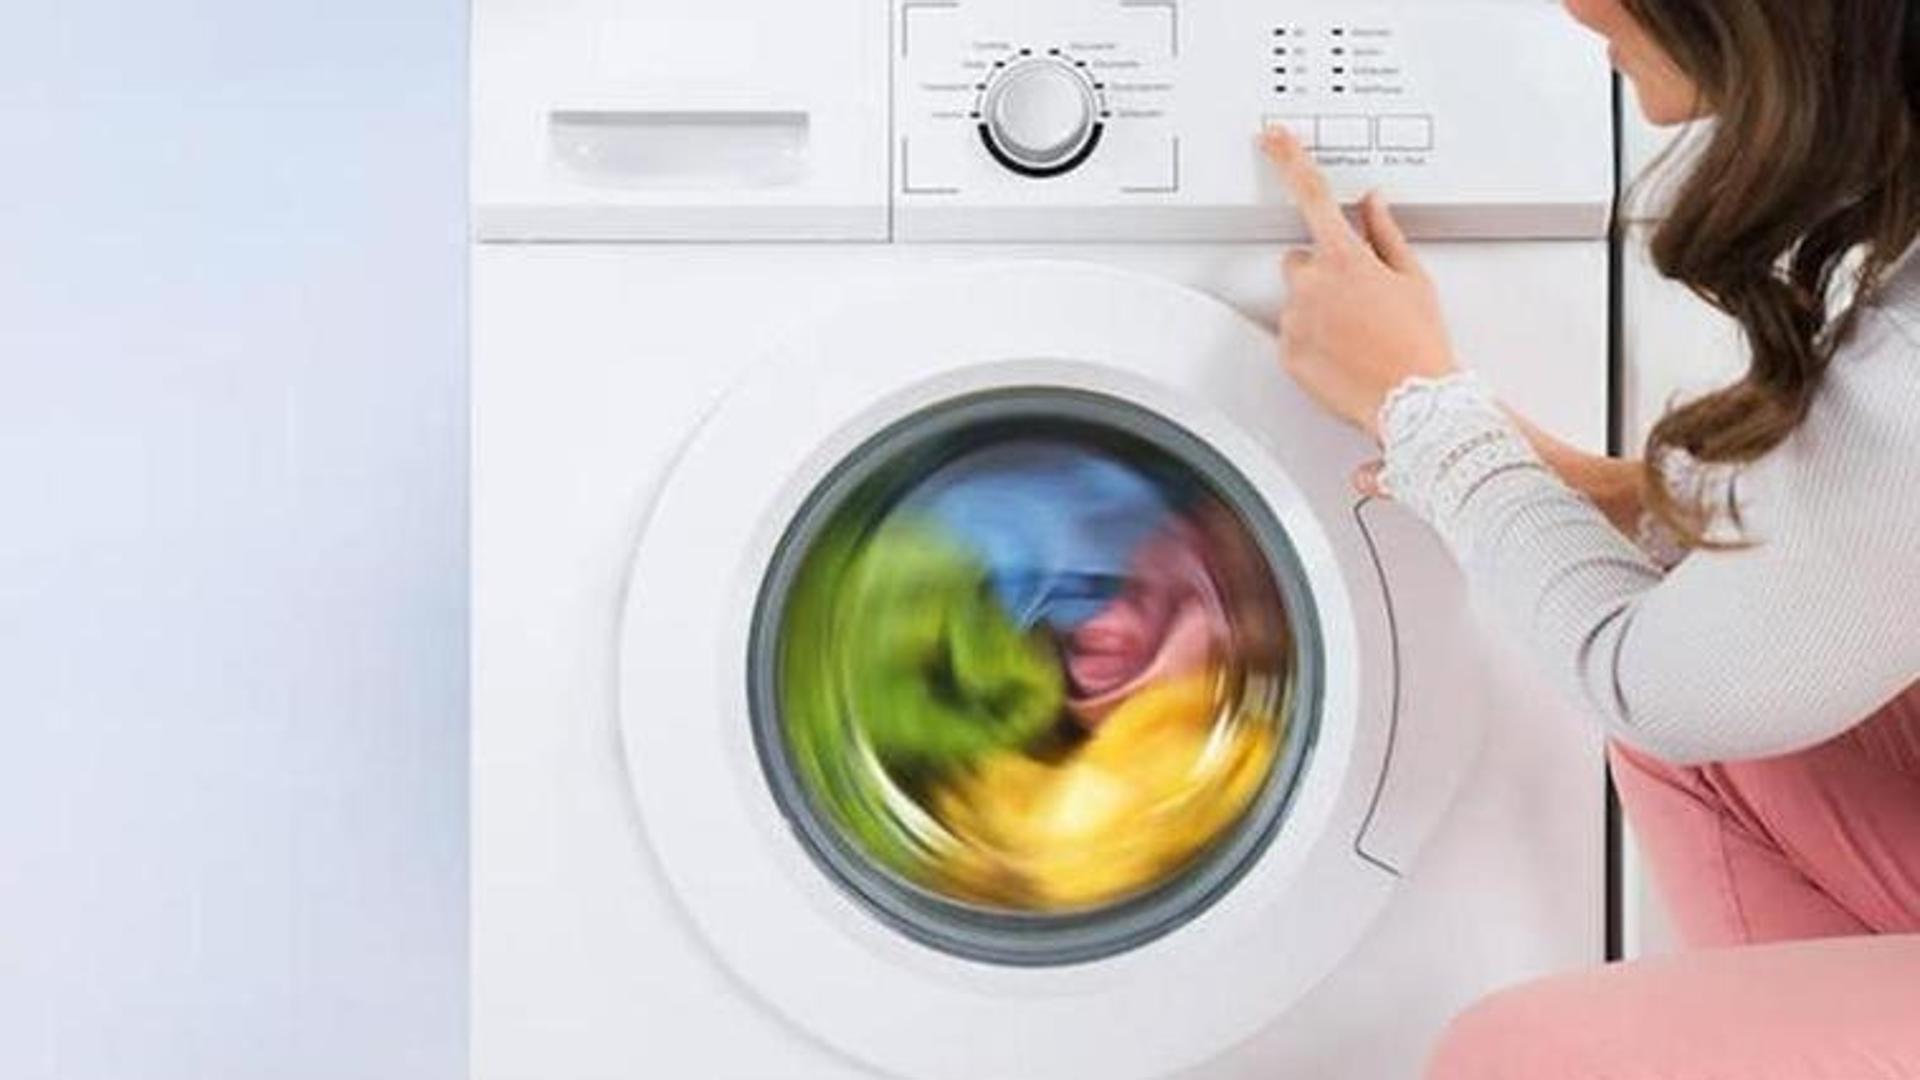 Save on the price of electricity today: pay attention to putting the washing machine on at this time